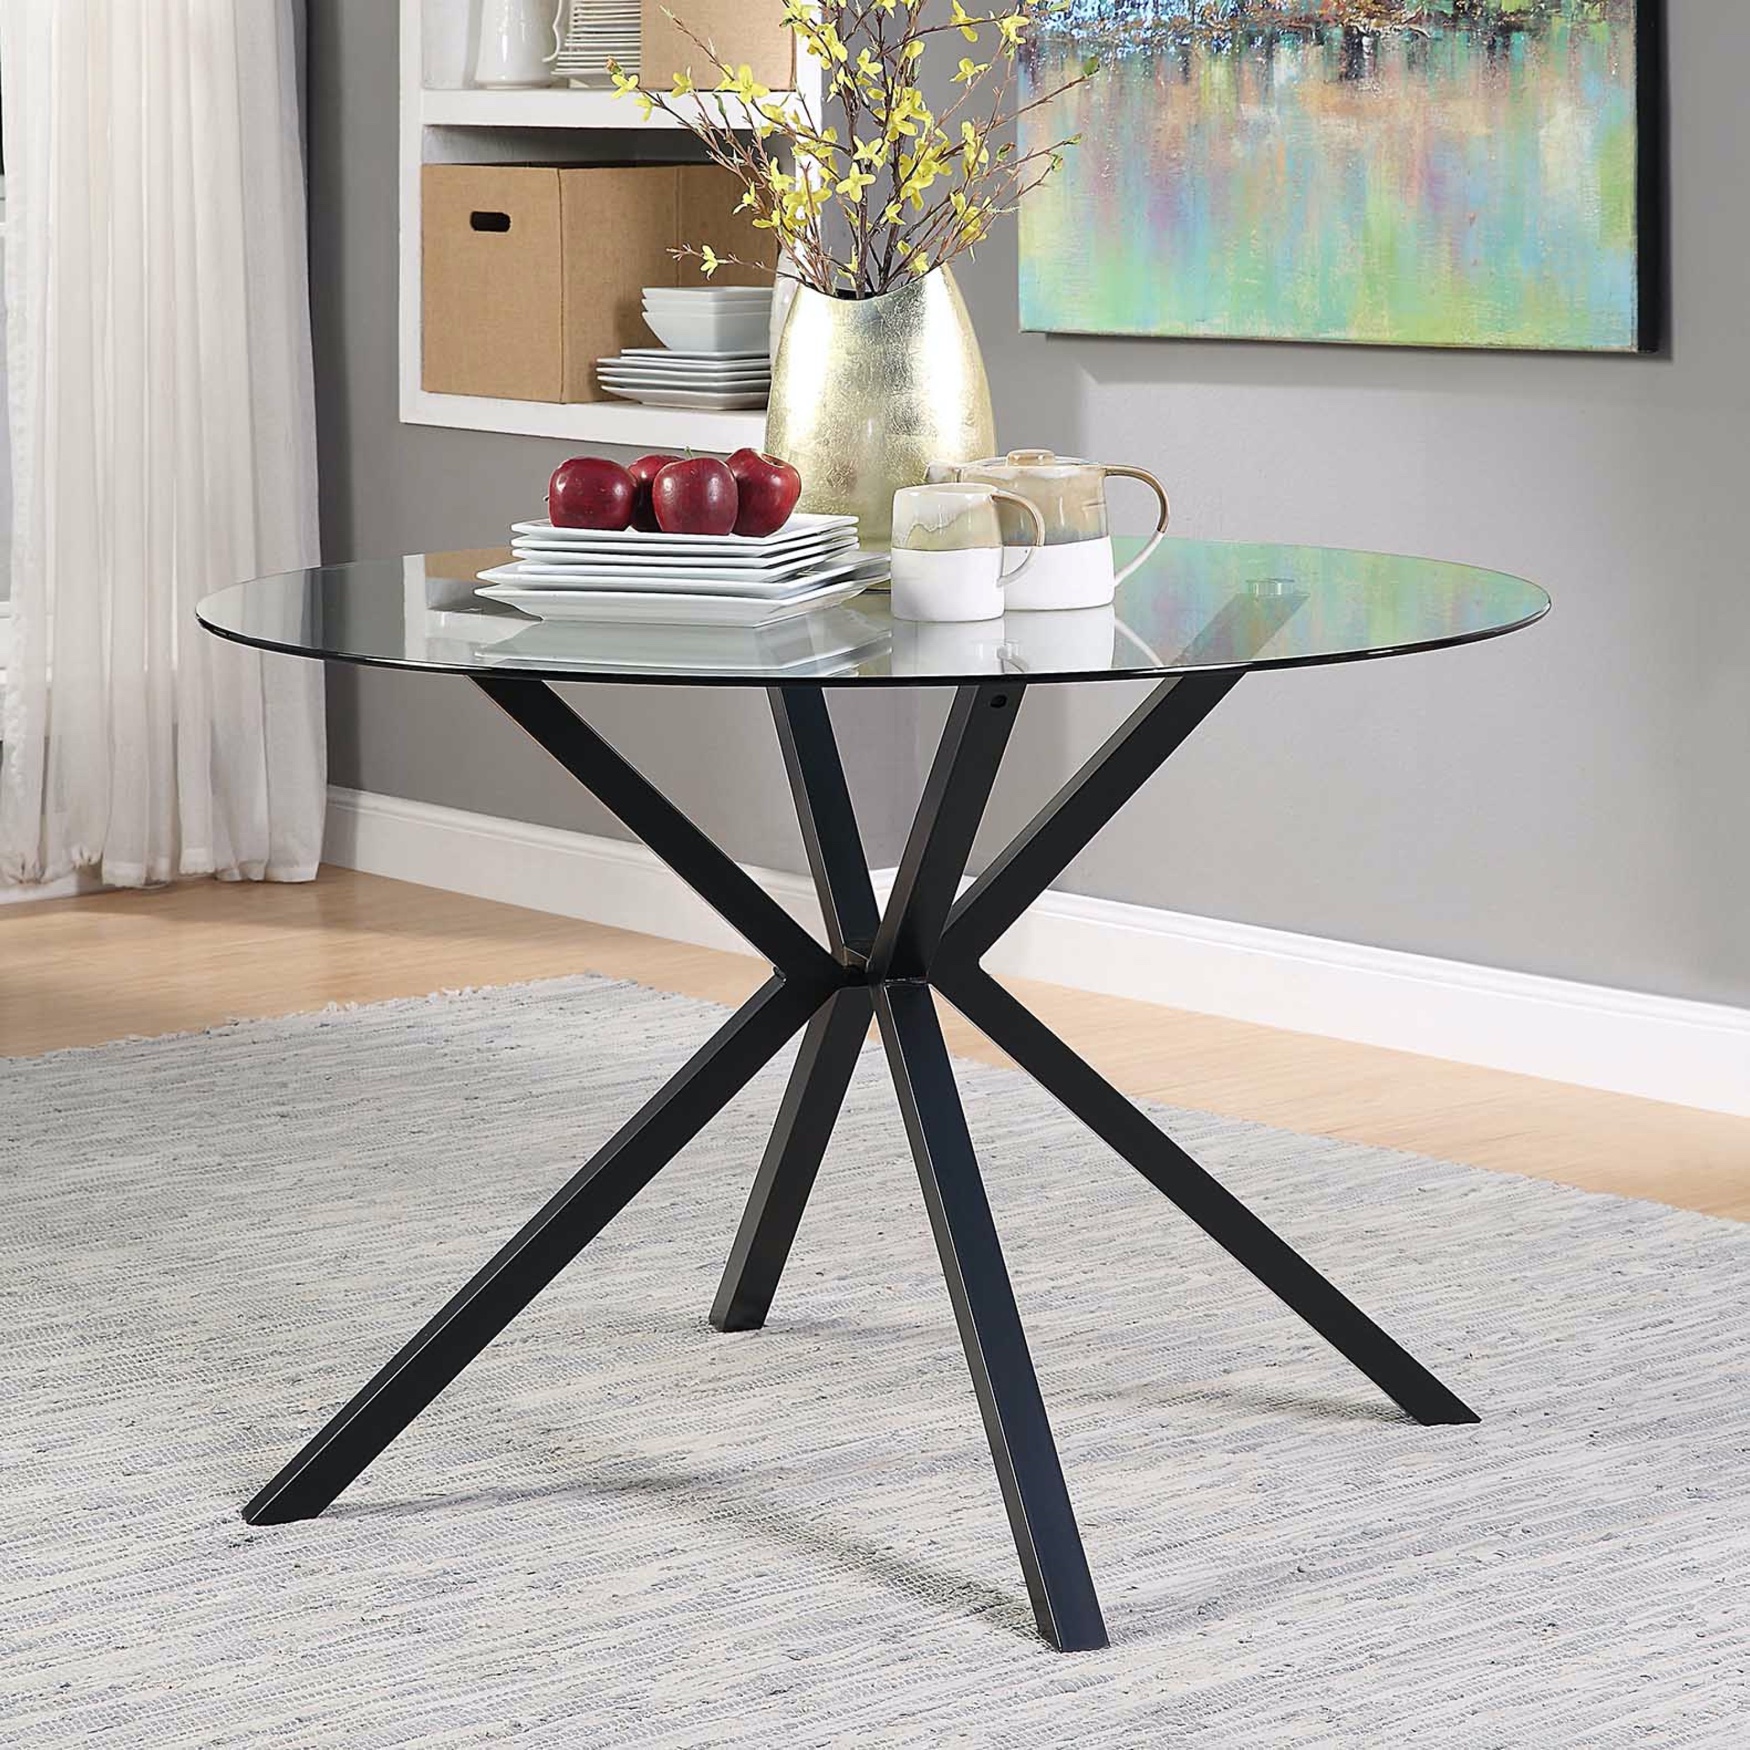 Charles Round Table/Glass and Black Metal Legs, BLACK